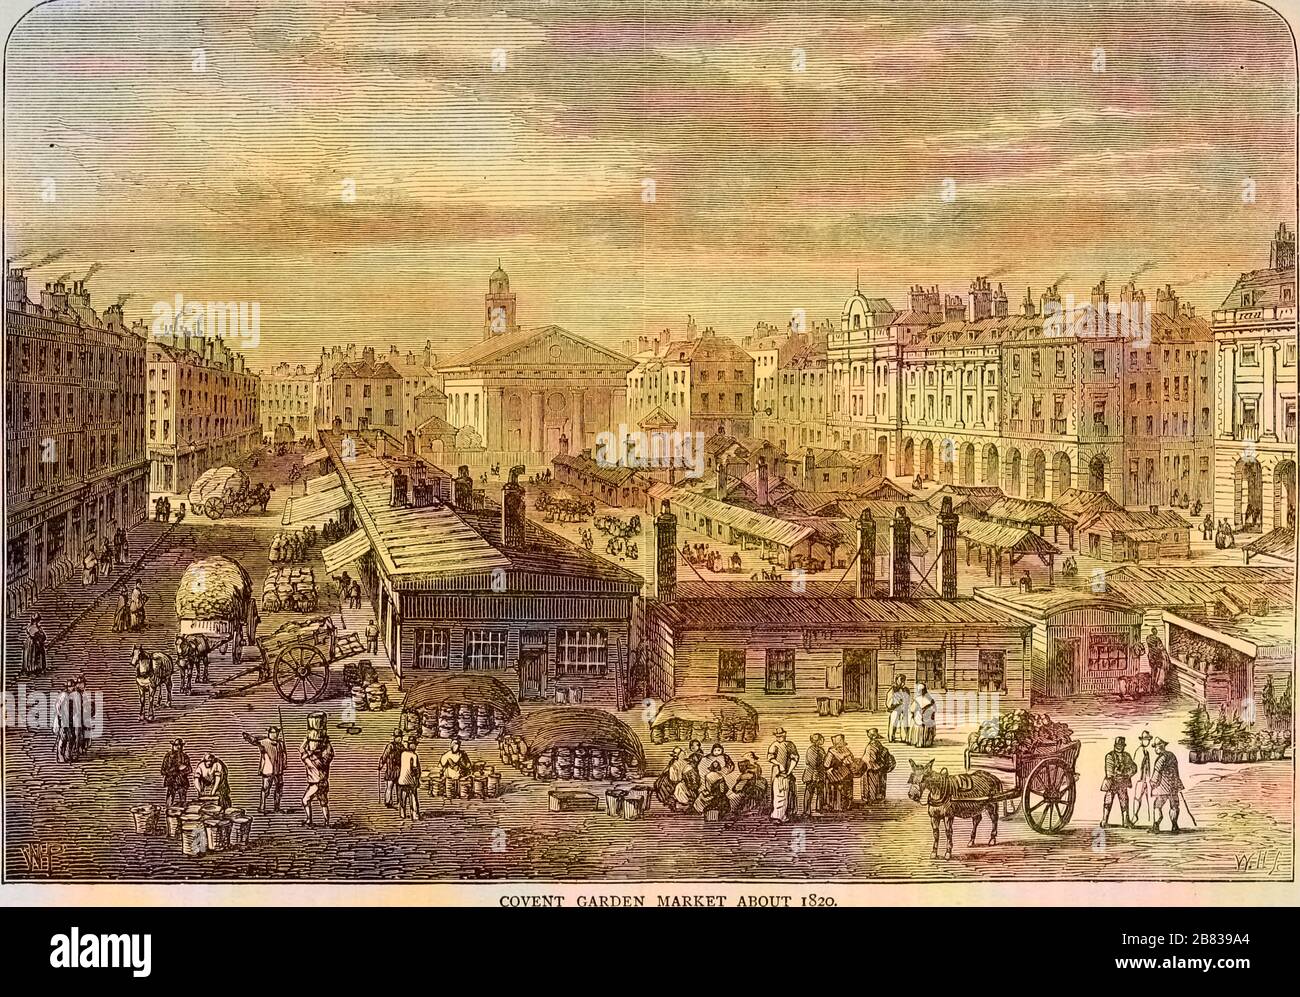 Engraving of the Covent Garden market in London, England, from the book 'Old and new London: a narrative of its history, its people, and its places' by Thornbury Walter, 1873. Courtesy Internet Archive. Note: Image has been digitally colorized using a modern process. Colors may not be period-accurate. () Stock Photo